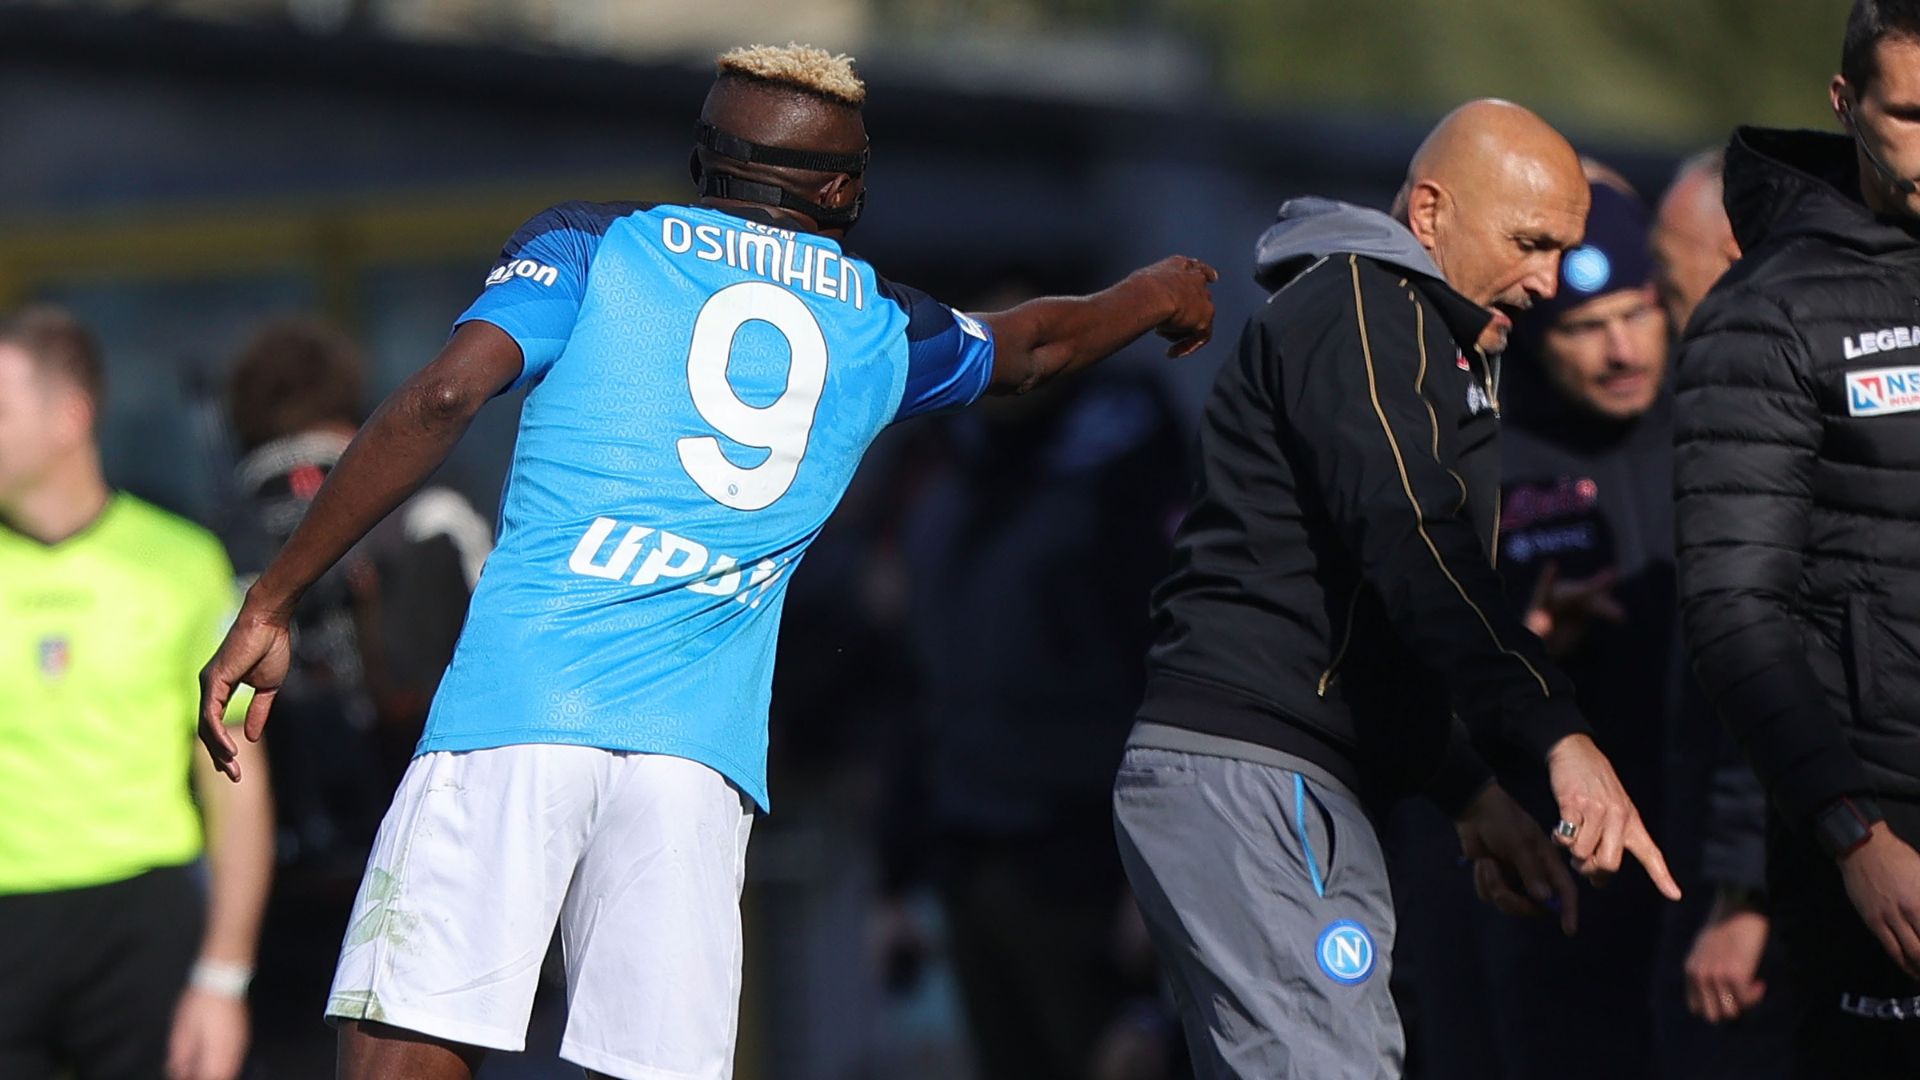 Victor Osimhen next to Luciano Spalletti (Credit: Getty Images)